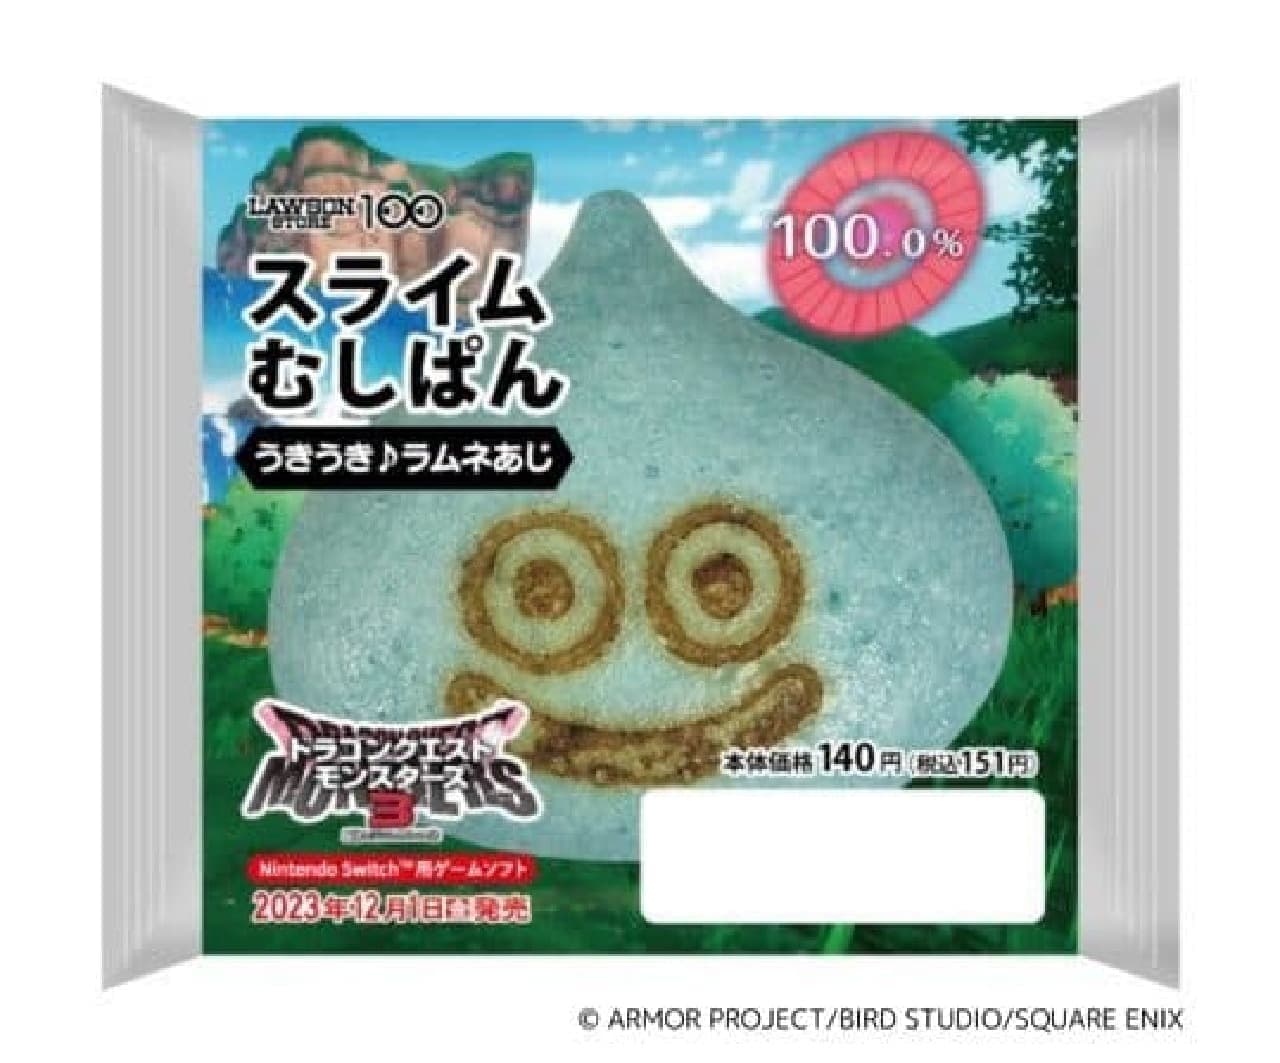 LAWSON STORE100 "Slime Mushipan float with Ramune flavor